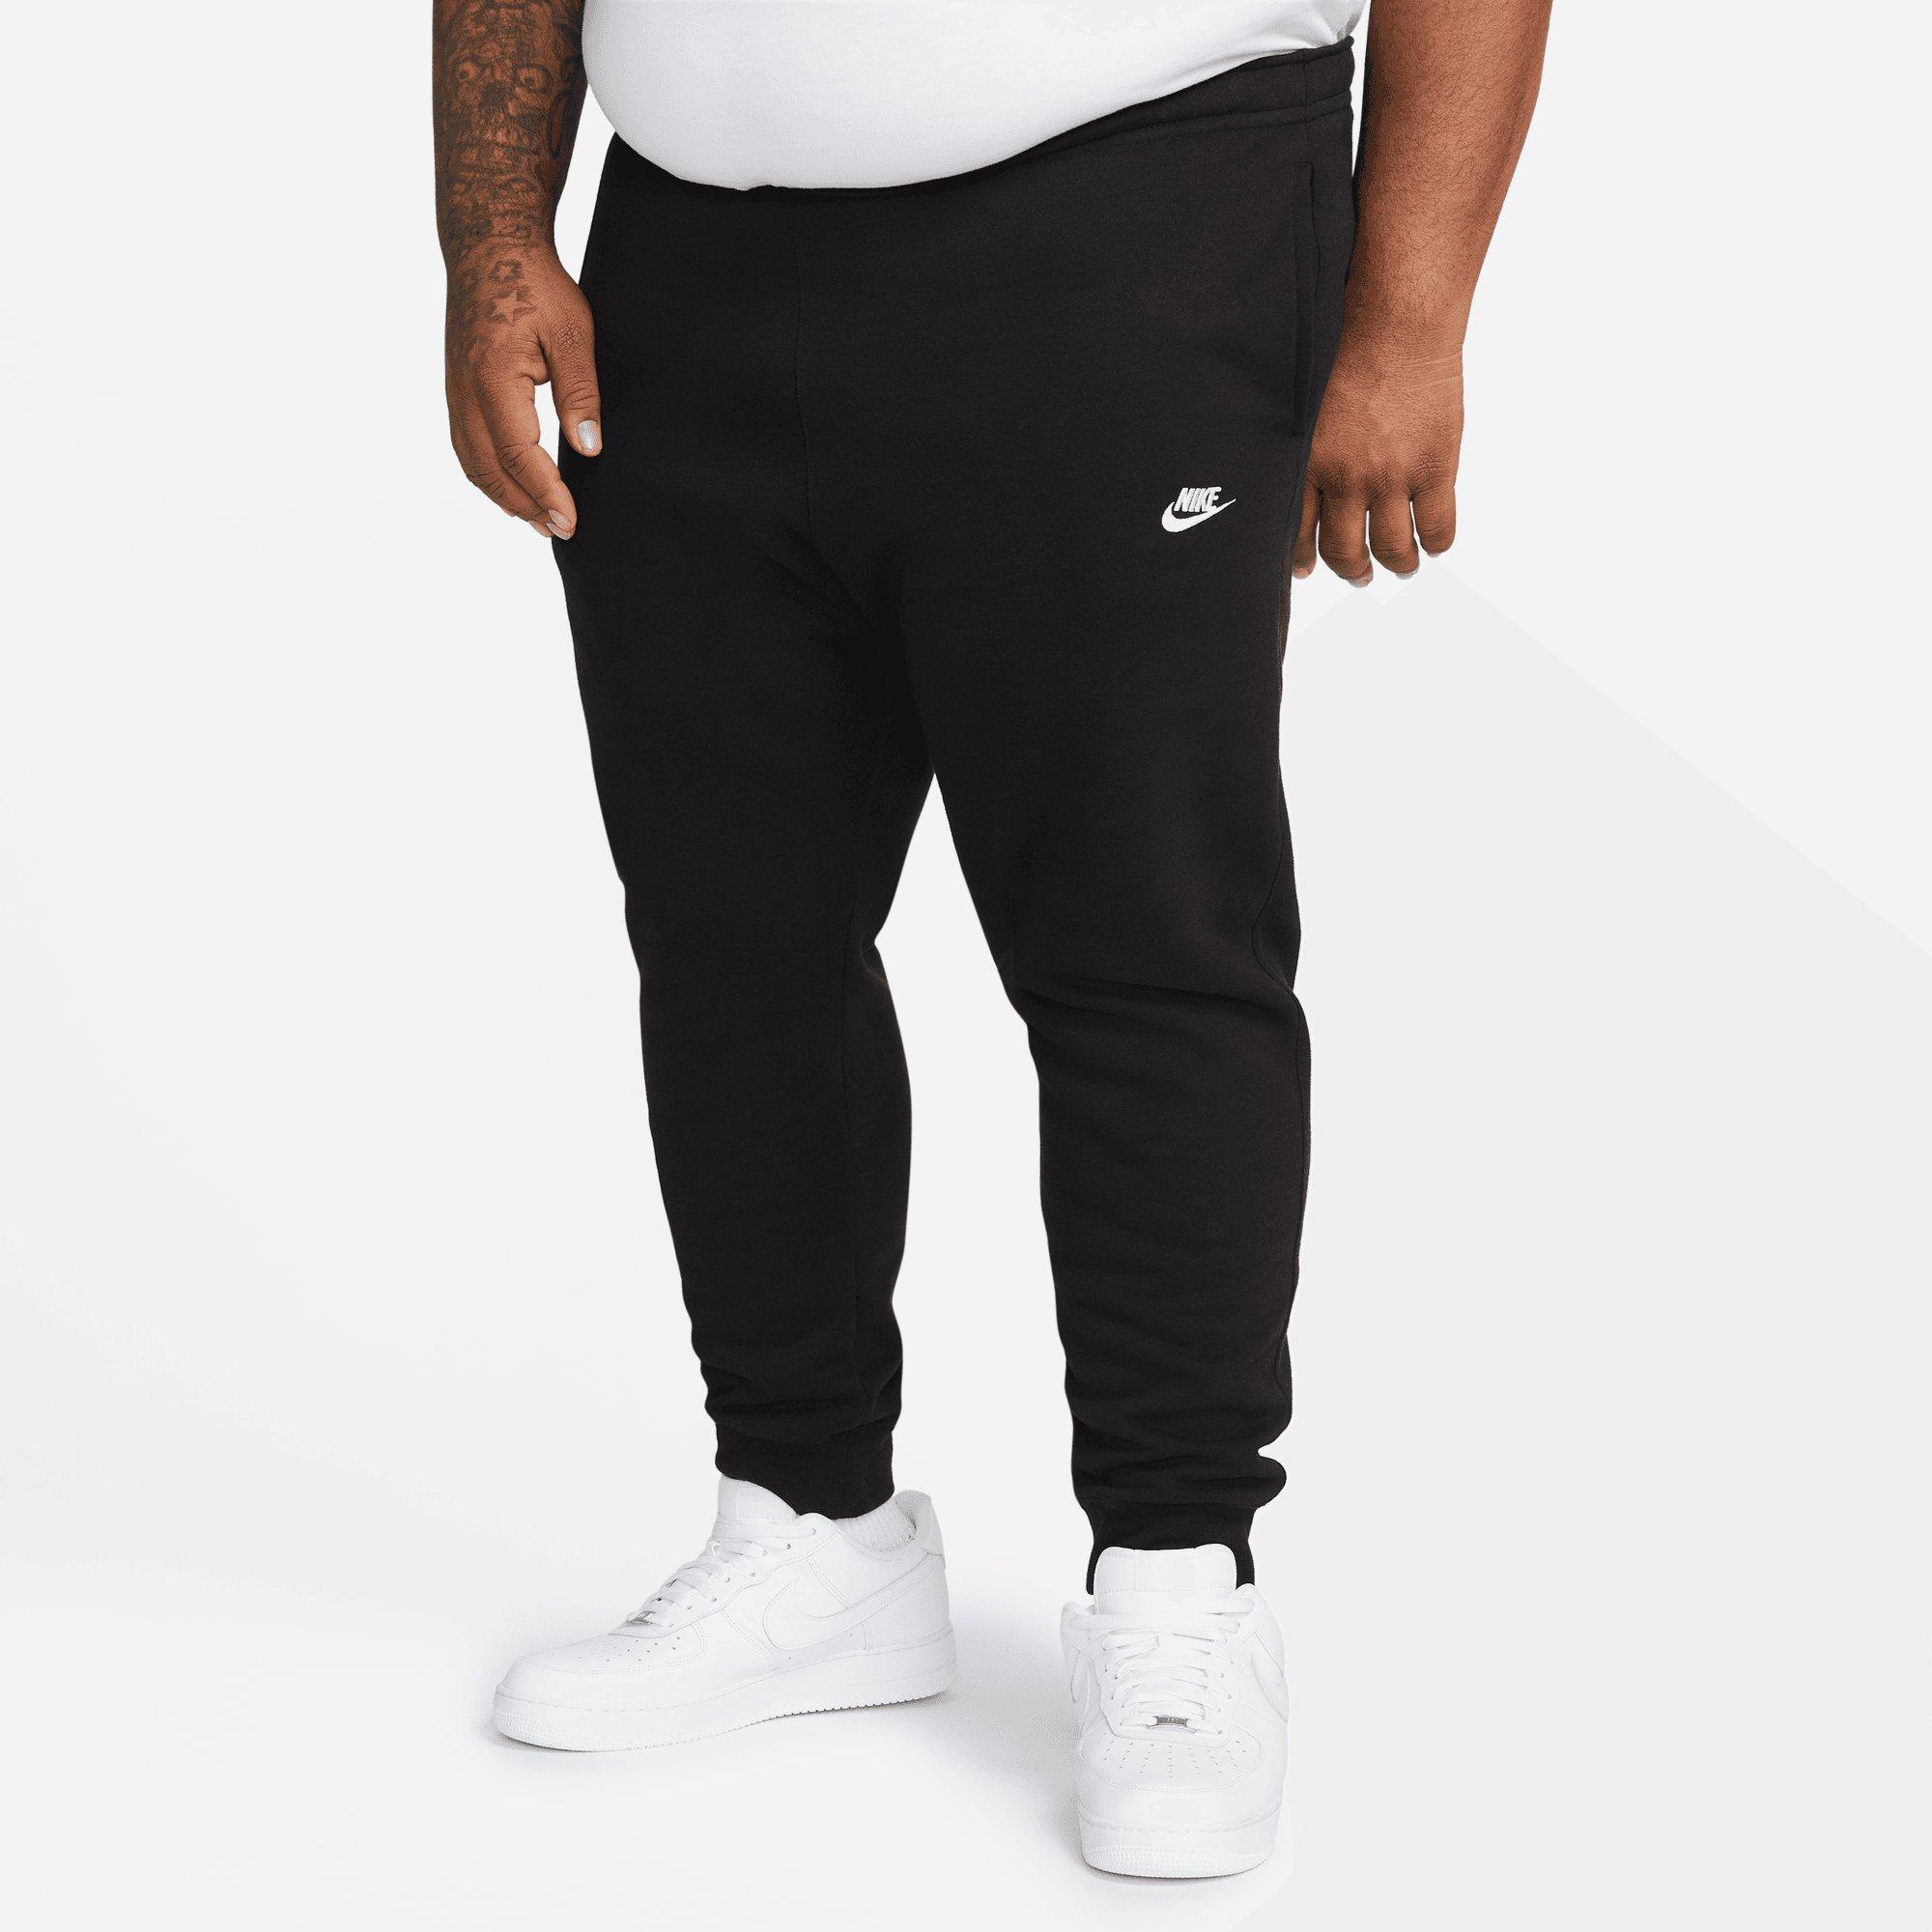 Men's Rival Fleece Joggers from Under Armour